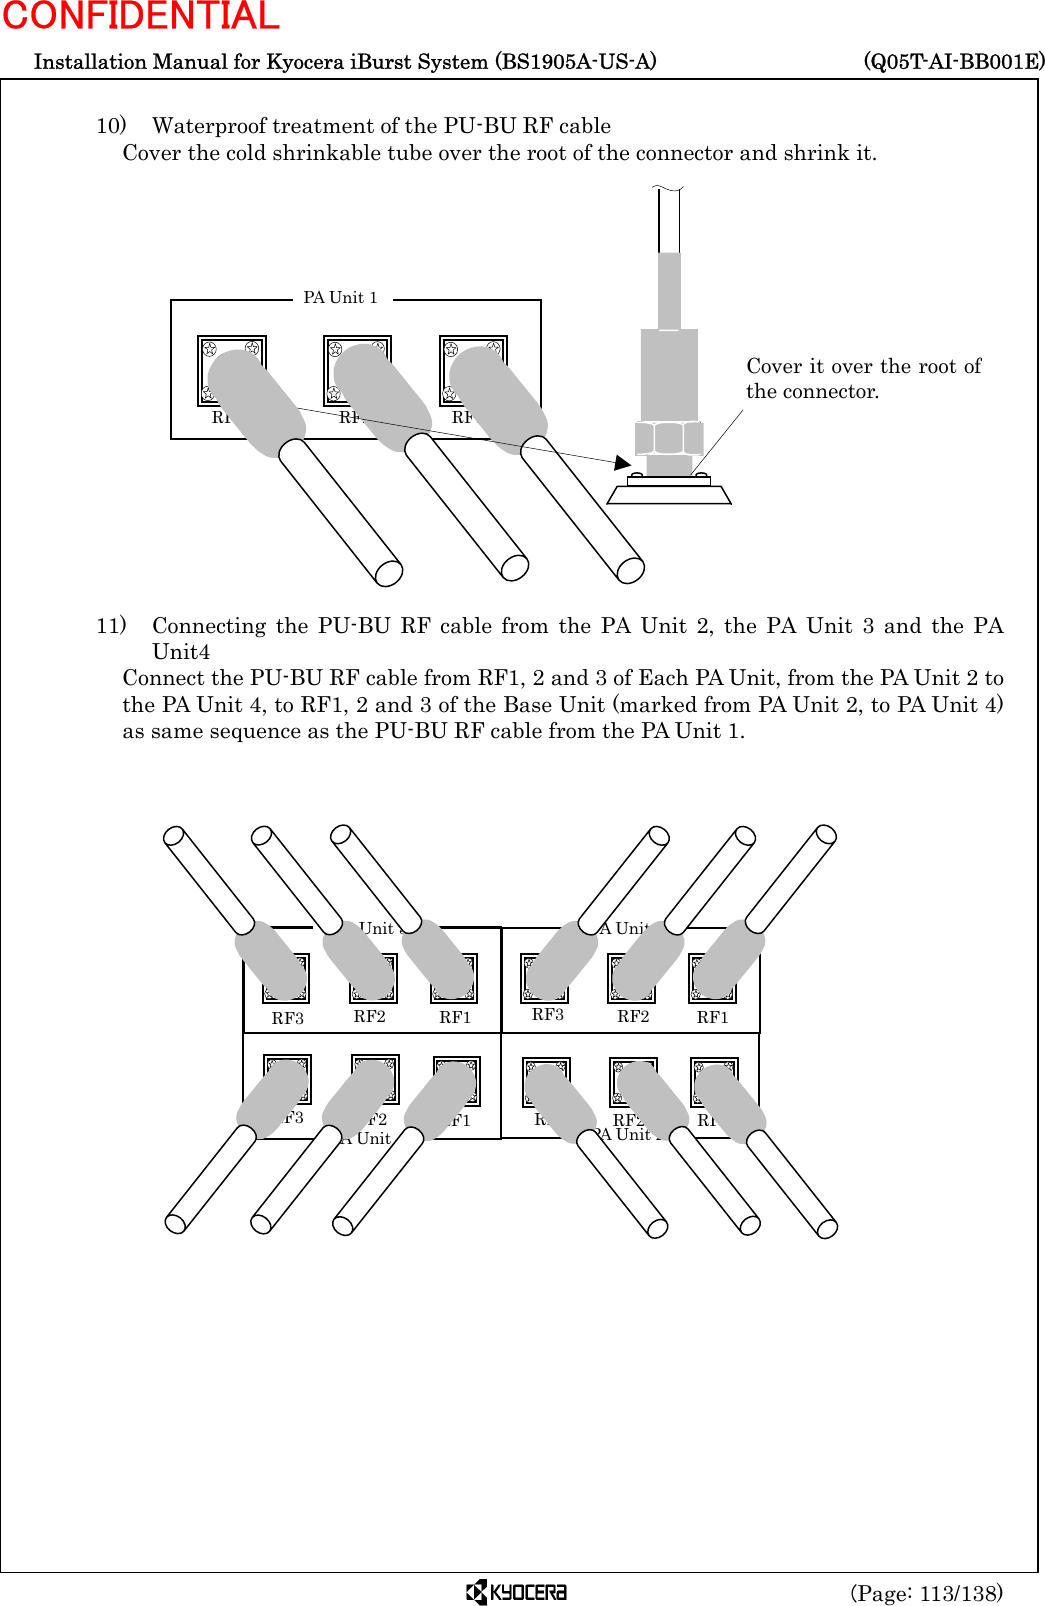  Installation Manual for Kyocera iBurst System (BS1905A-US-A)     (Q05T-AI-BB001E) (Page: 113/138) CONFIDENTIAL  10)    Waterproof treatment of the PU-BU RF cable Cover the cold shrinkable tube over the root of the connector and shrink it.                  11)   Connecting the PU-BU RF cable from the PA Unit 2, the PA Unit 3 and the PA Unit4 Connect the PU-BU RF cable from RF1, 2 and 3 of Each PA Unit, from the PA Unit 2 to the PA Unit 4, to RF1, 2 and 3 of the Base Unit (marked from PA Unit 2, to PA Unit 4) as same sequence as the PU-BU RF cable from the PA Unit 1.                  Cover it over the root ofthe connector.  RF3    RF2 RF1 PA Unit 1 RF1 RF2 RF3  RF1  RF2RF3 RF1  RF2 RF3RF1 RF2 RF3PA Unit 3 PA Unit 4 PA Unit 1 PA Unit 2 